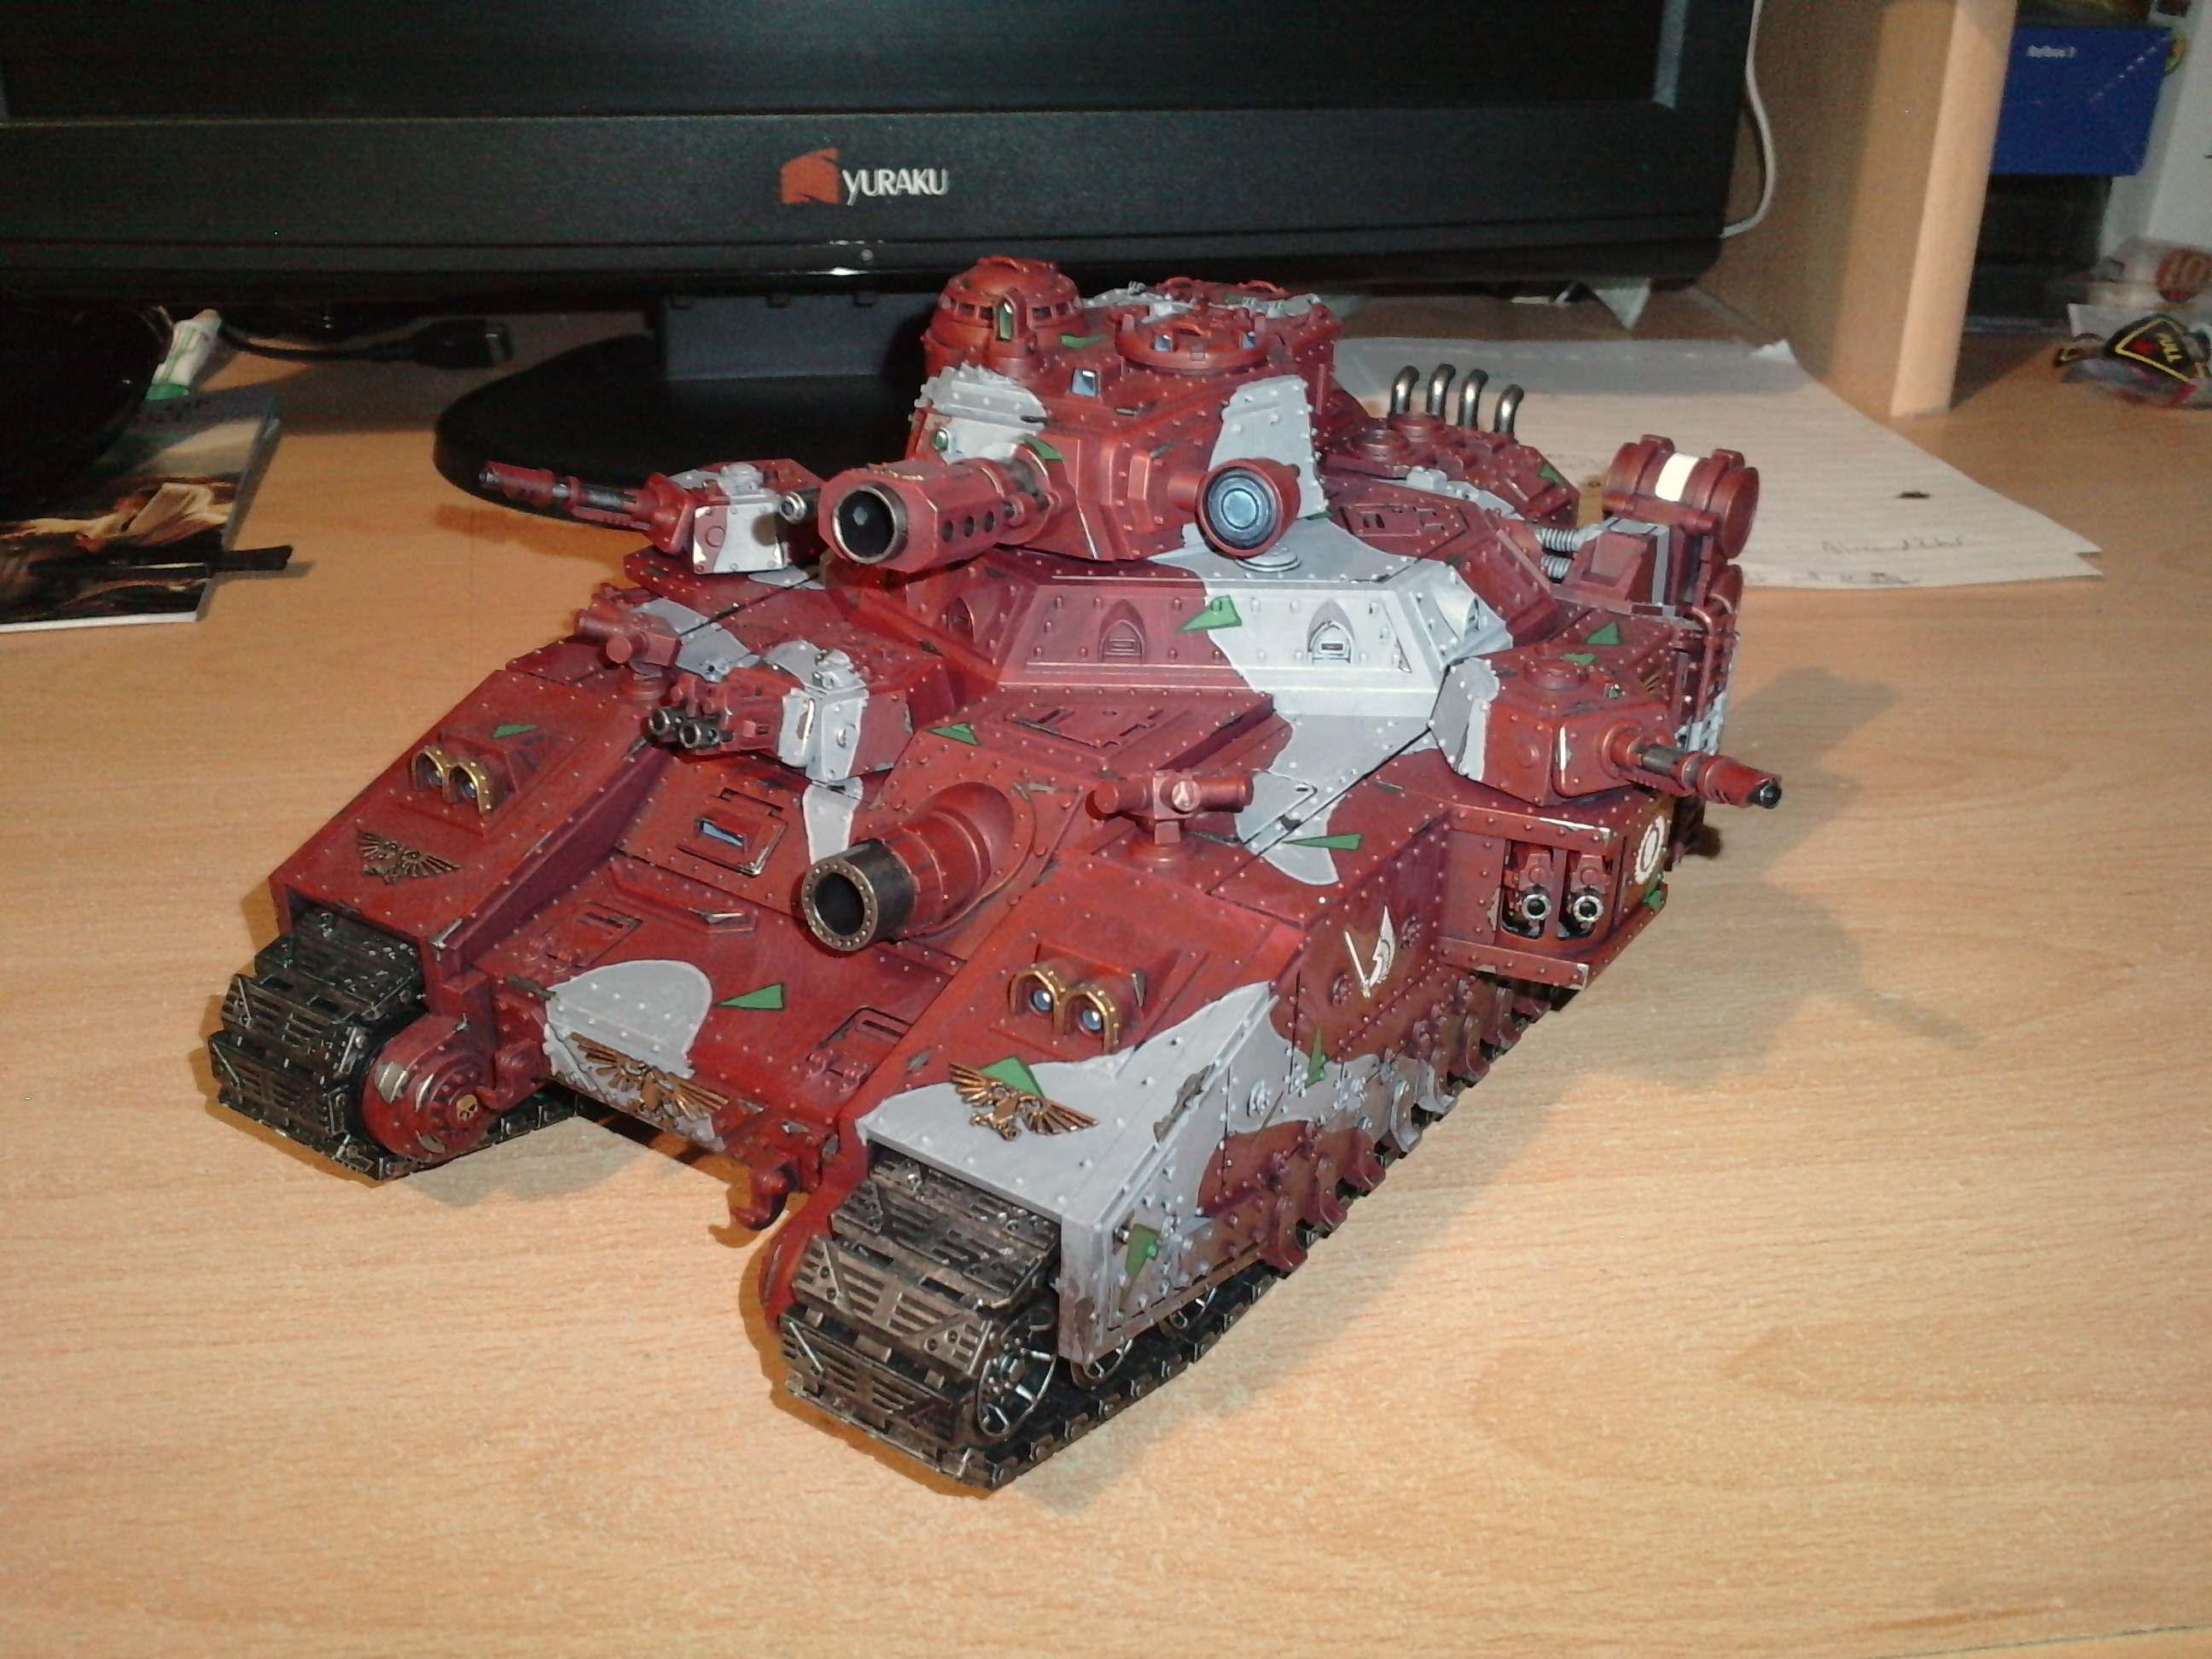 Hellhammer, Imperial Guard, Super-heavy, Tank, Warhammer 40,000